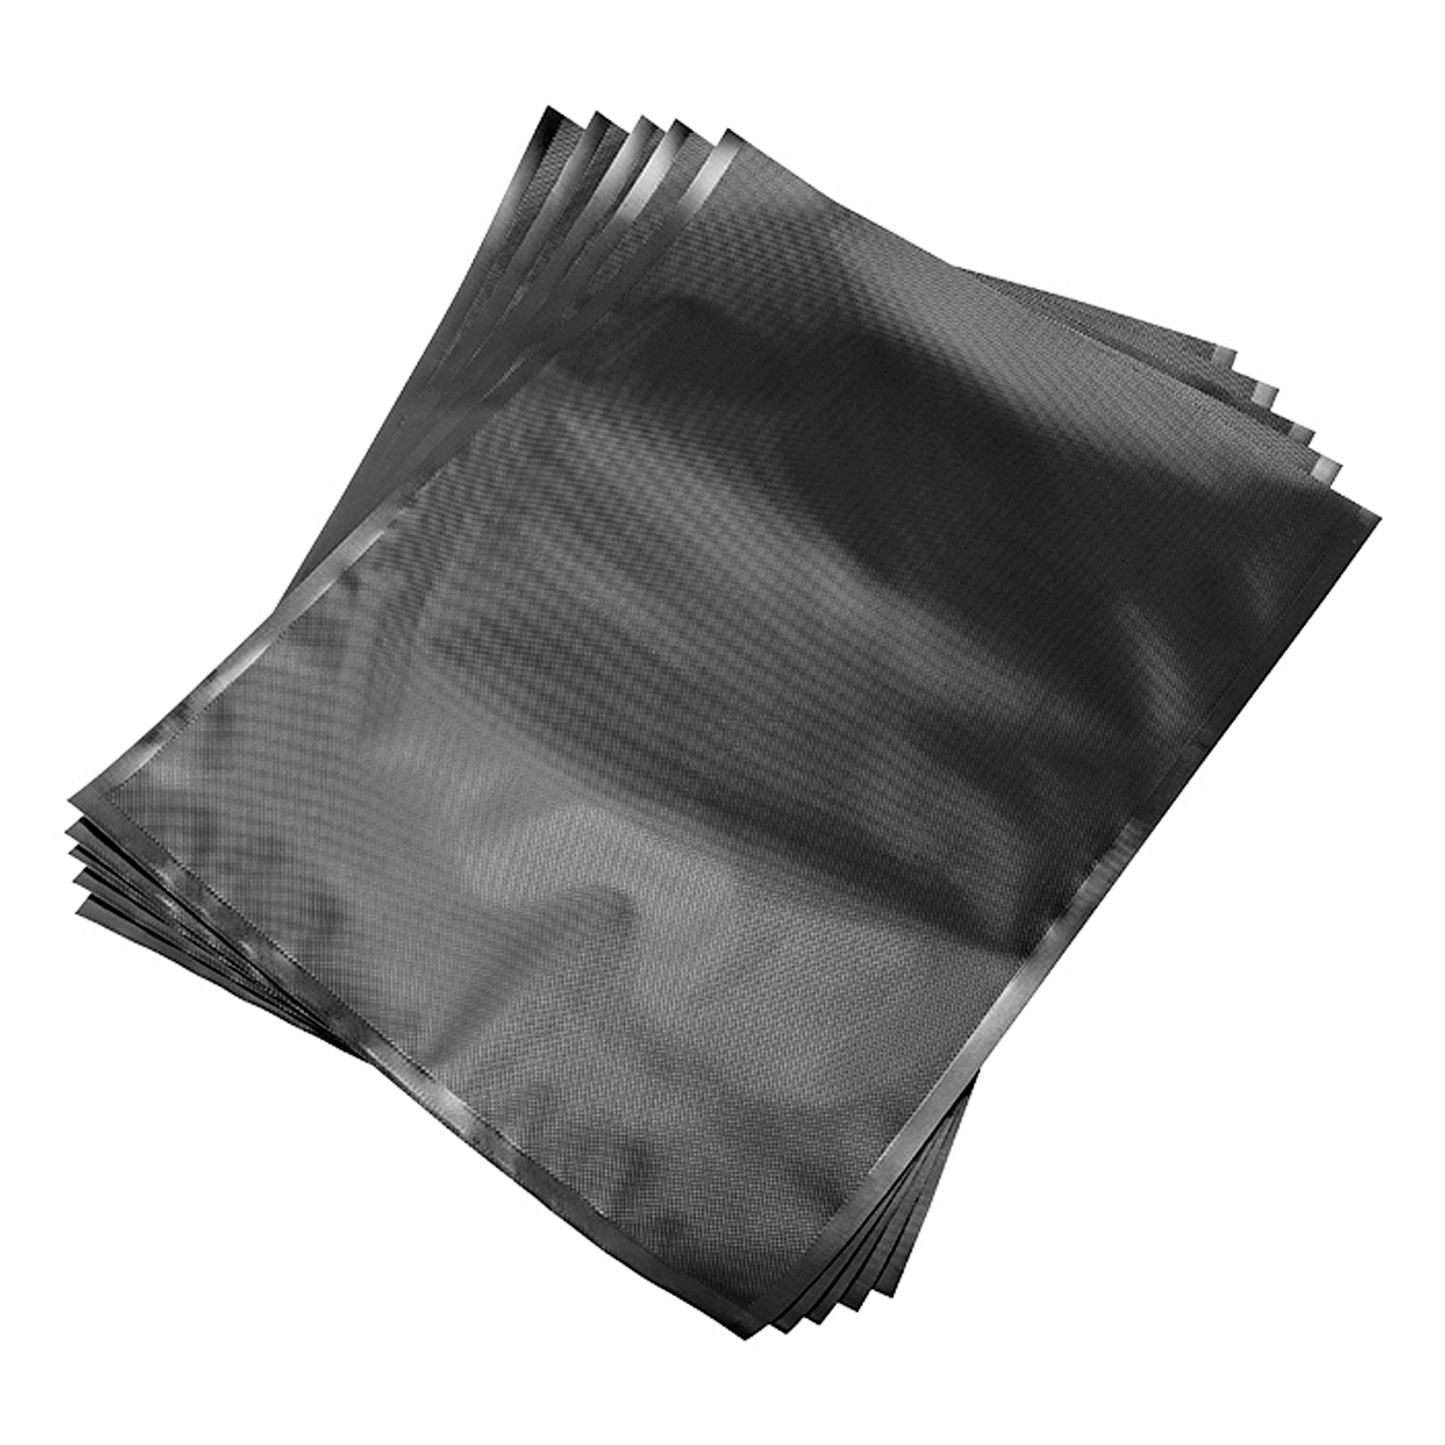 ArmorVac 11"x24" 5mil Precut Vacuum Seal Bags Black & Clear (50 Pack) 131124BCR50 Harvest & Extraction